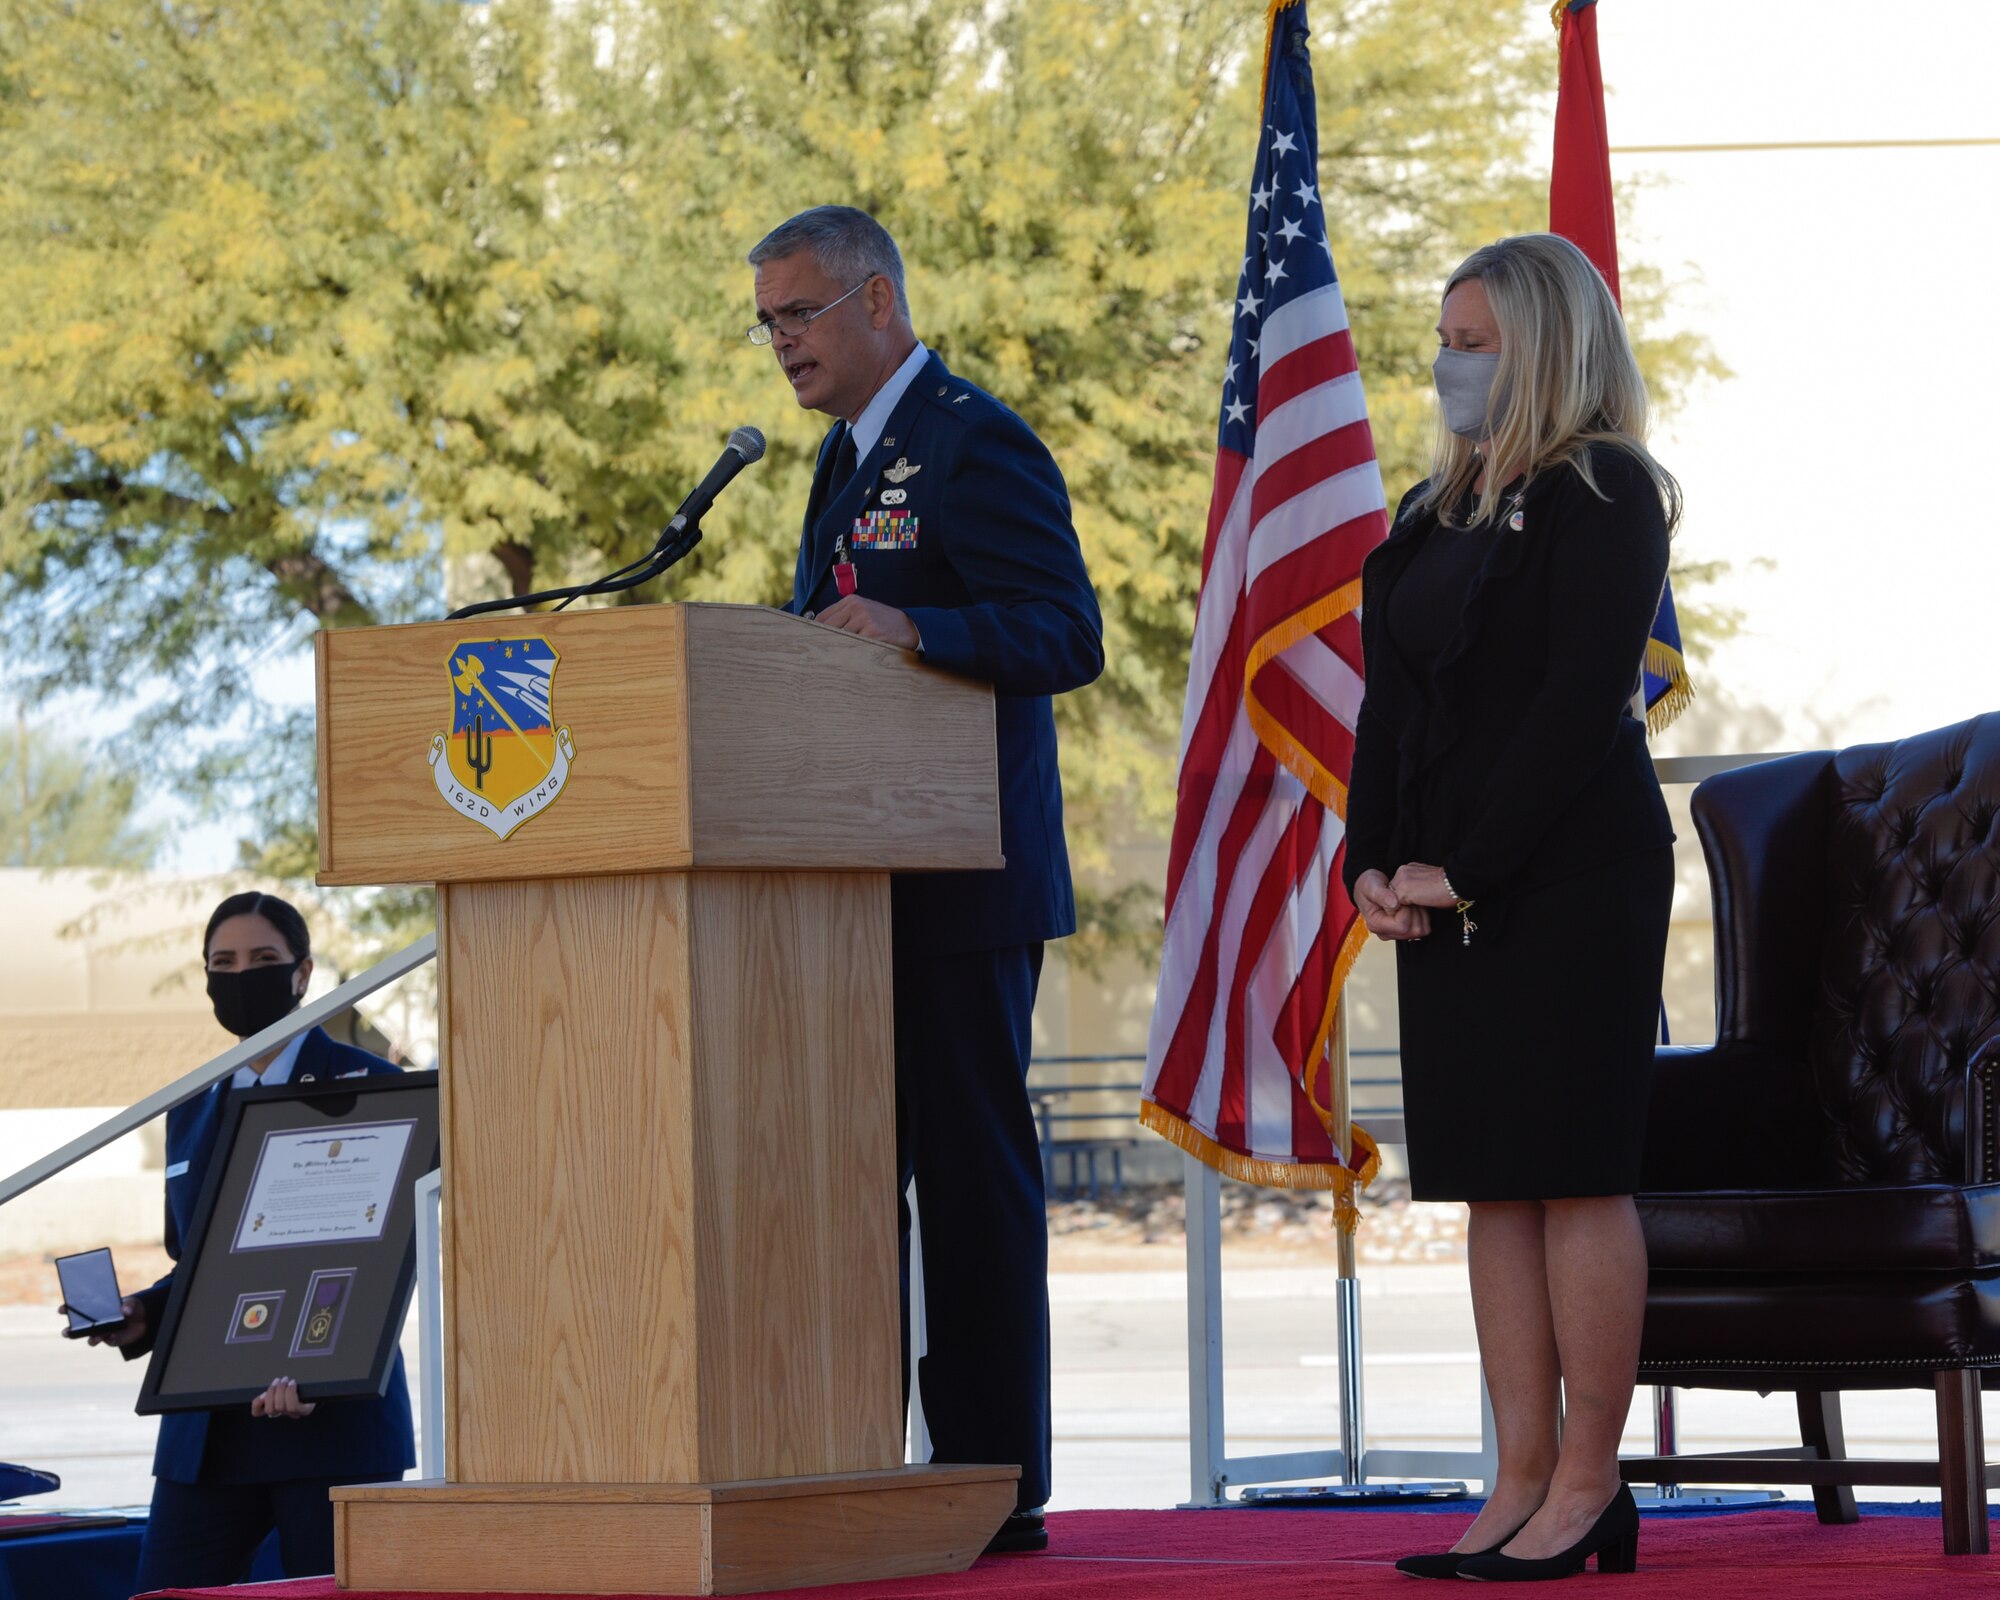 Brig. Gen. Andrew MacDonald, the former commander of the 162nd Wing, honored his wife's service with a medal and plaque during his retirement ceremony Jan. 10 at the Morris Air National Guard Base. Due to the COVID-19 pandemic, the wing held a ceremony for MacDonald’s retirement by limiting attendance to family and distinguished guests, in person, while live-streaming the event to members across base. (U.S. Air National Guard Photo by Staff Sgt. Aubrey Pomares/Released)